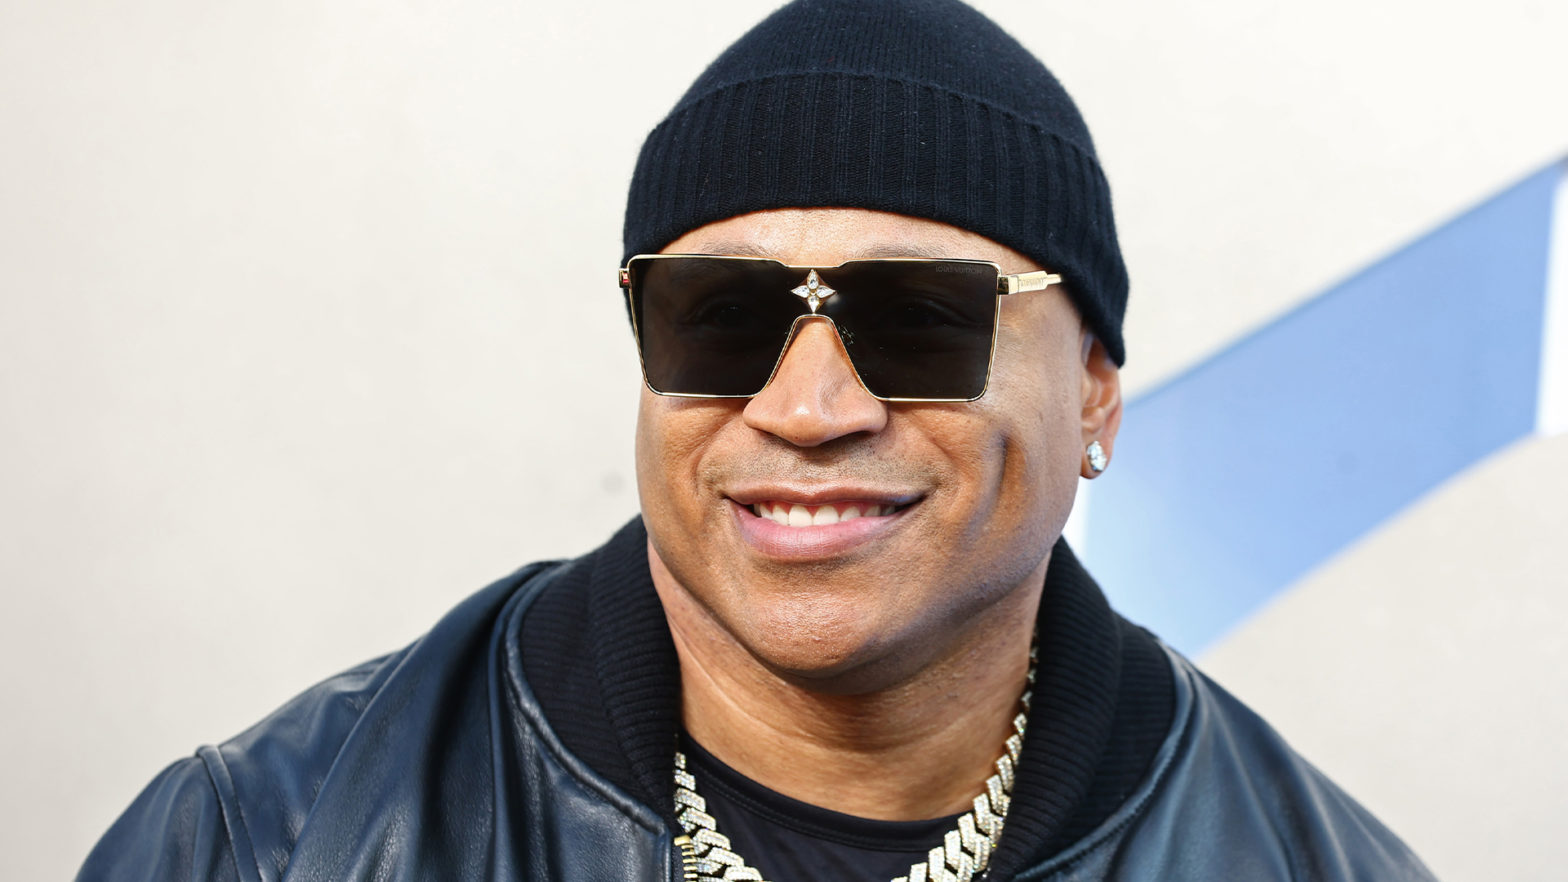 LL COOL J's Famous 1997 GAP Commercial Increased Company's Target Audience By 300 Percent